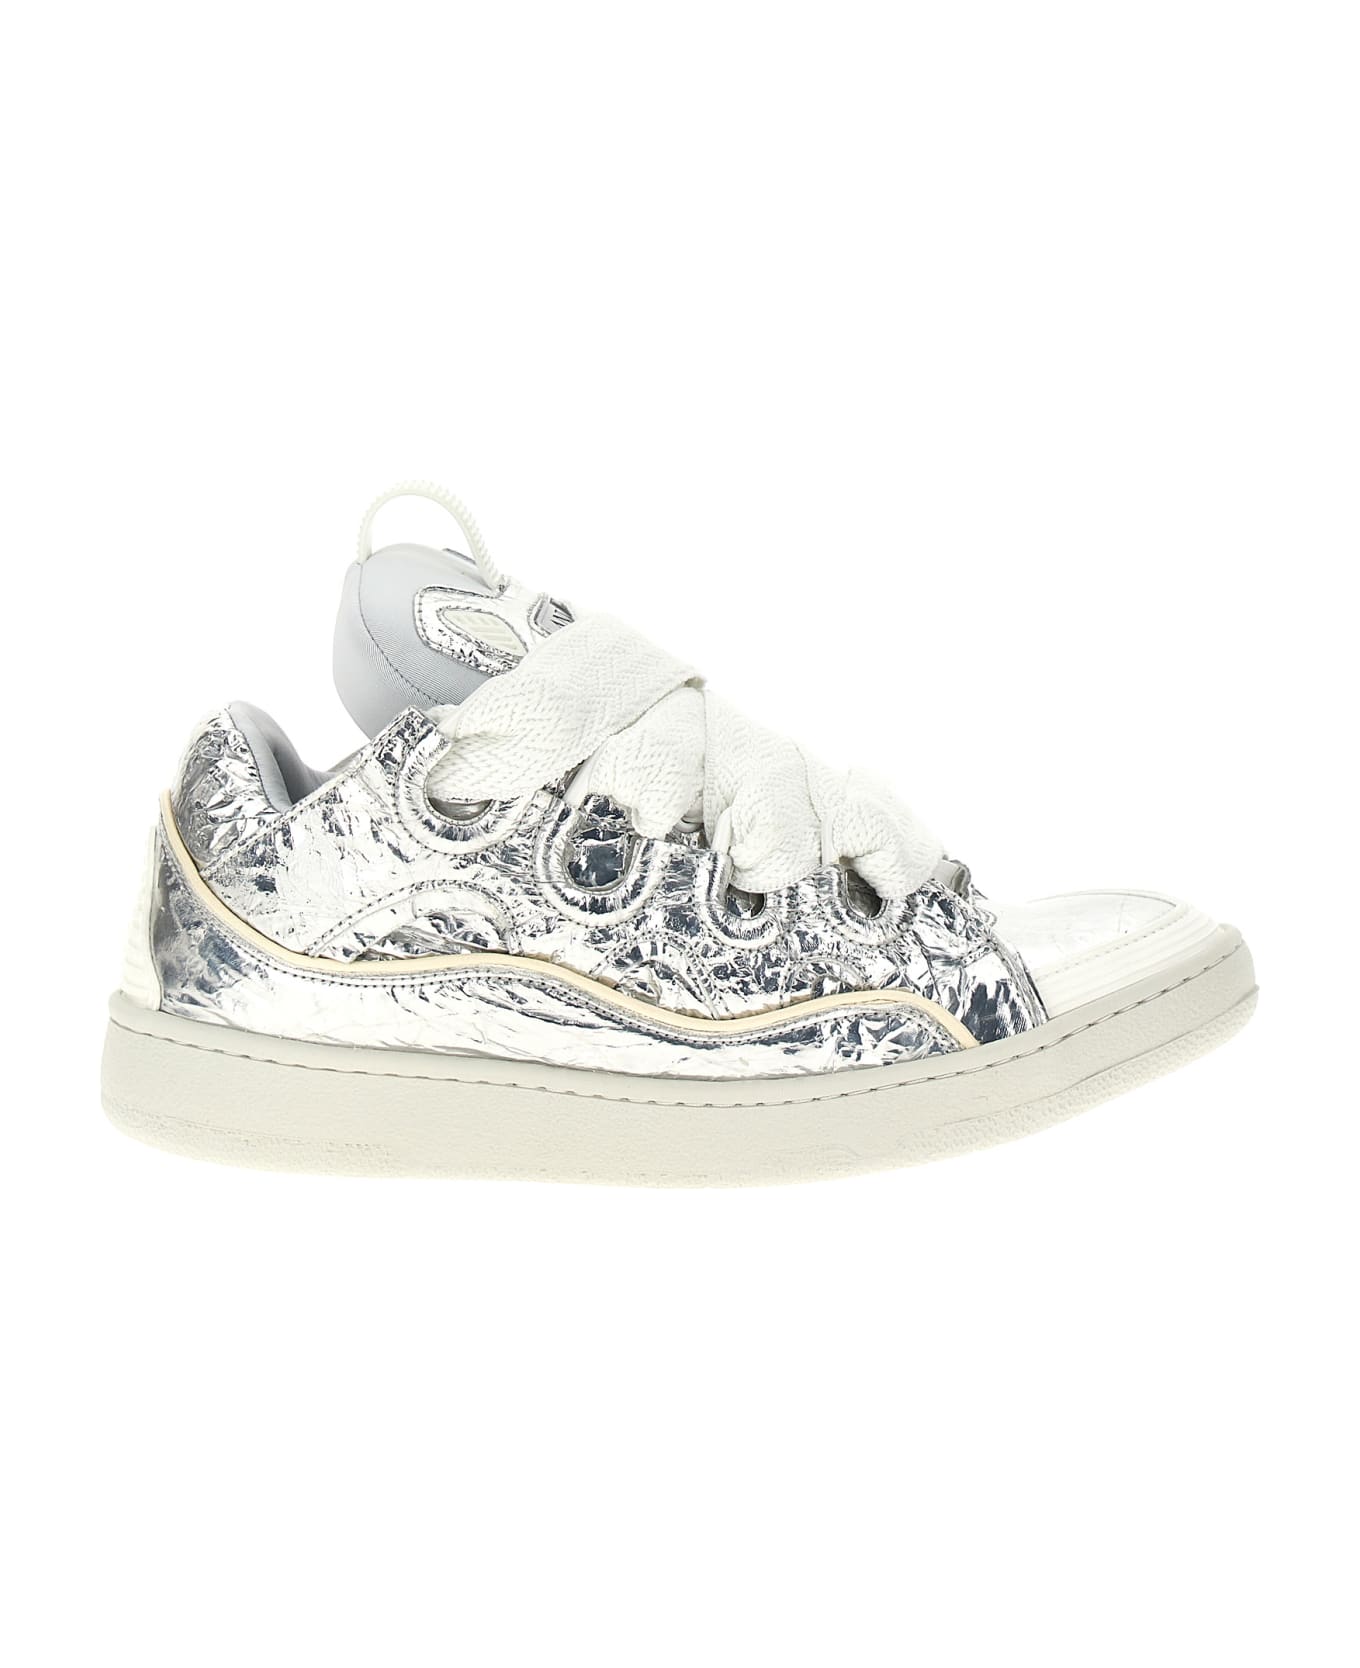 Lanvin 'curb' Sneakers - Silver